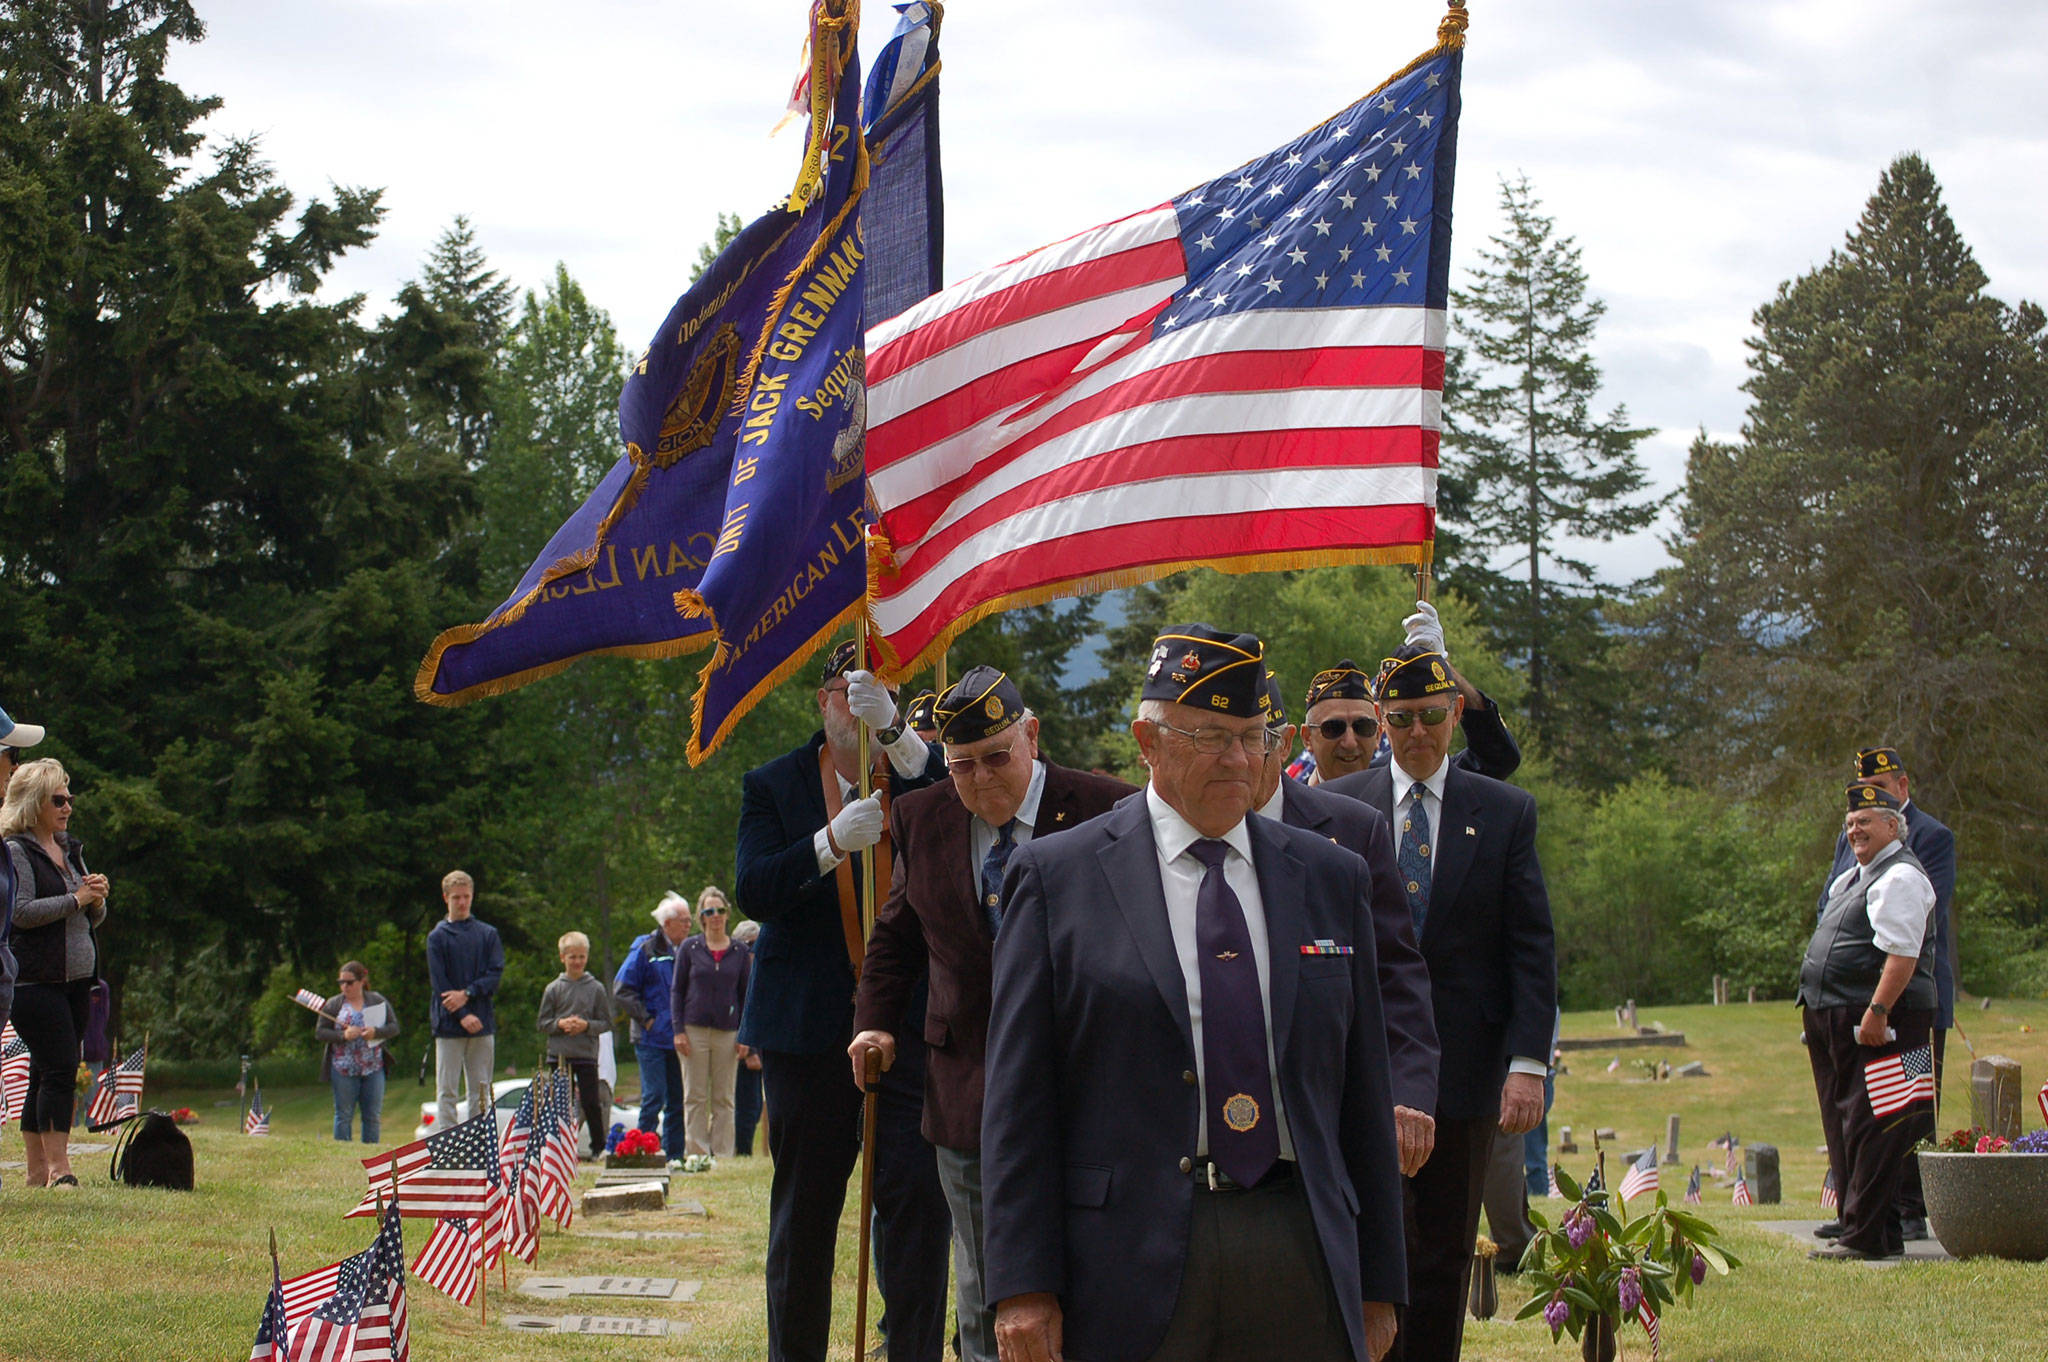 Members of Jack Grennan Post 62 of the American Legion lead with a series of flags at the Memorial Day ceremony at Sequim View Cemetery on May 28. Sequim Gazette photos by Erin Hawkins